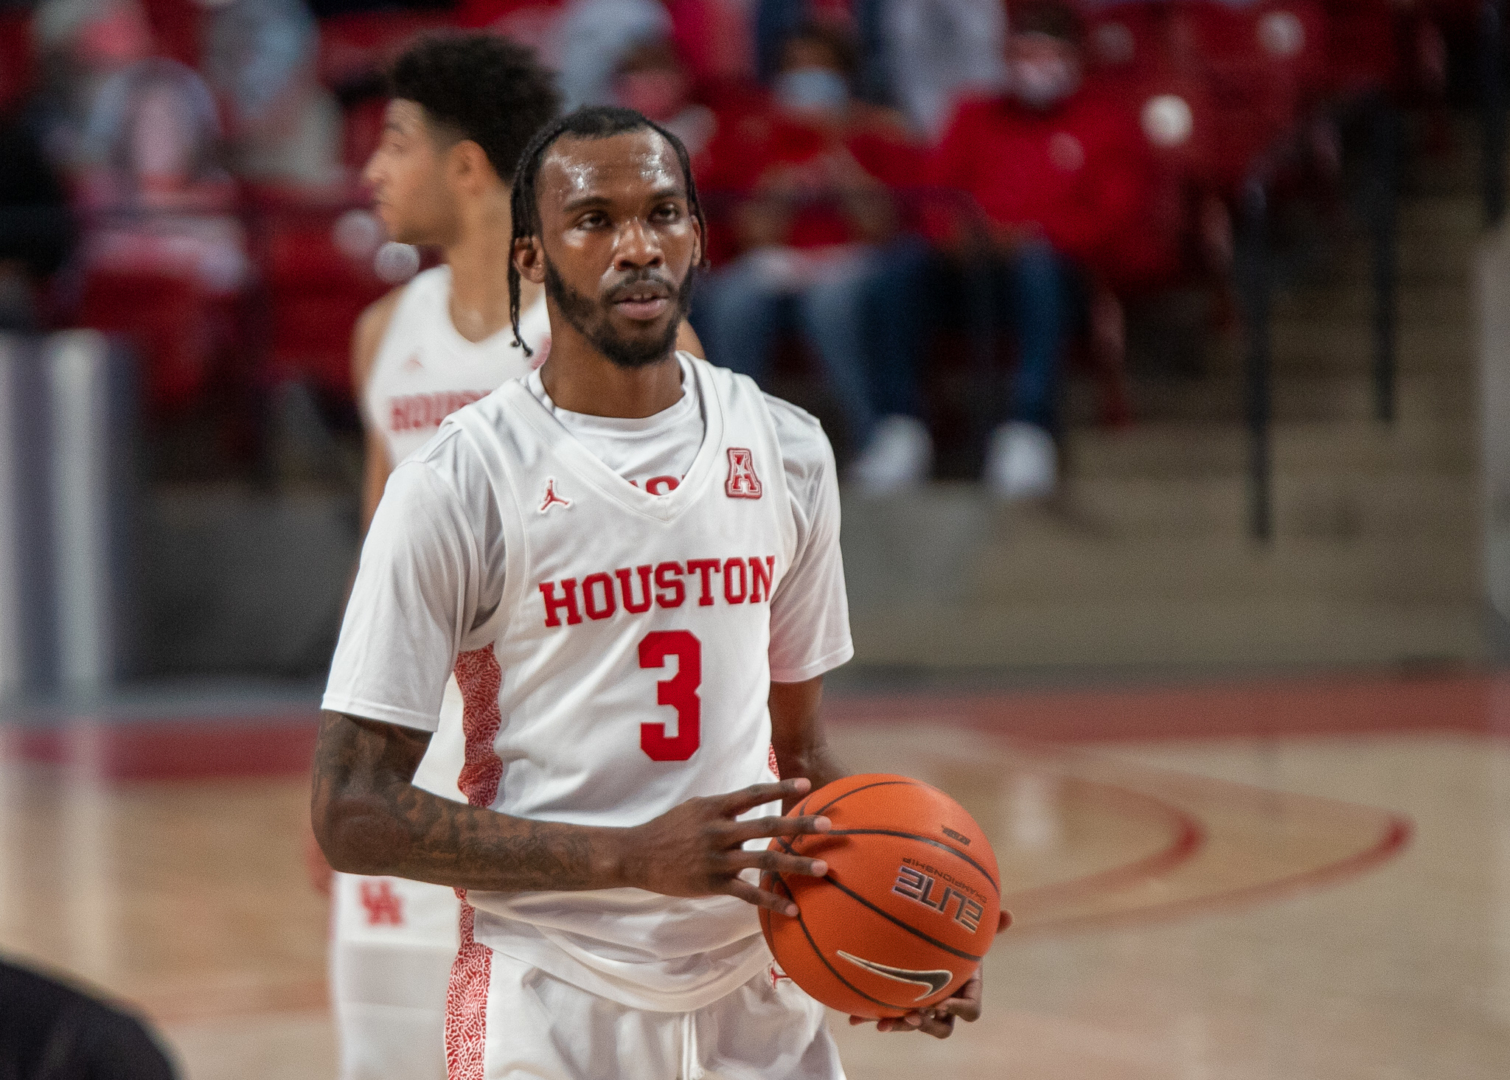 Houston guard DeJon Jarreau gathers the basketball ahead of a free-throw attempt against Cincinnati on Feb. 21 at Fertitta Center. UH will play against Cleveland State on Friday evening. | Andy Yanez/The Cougar